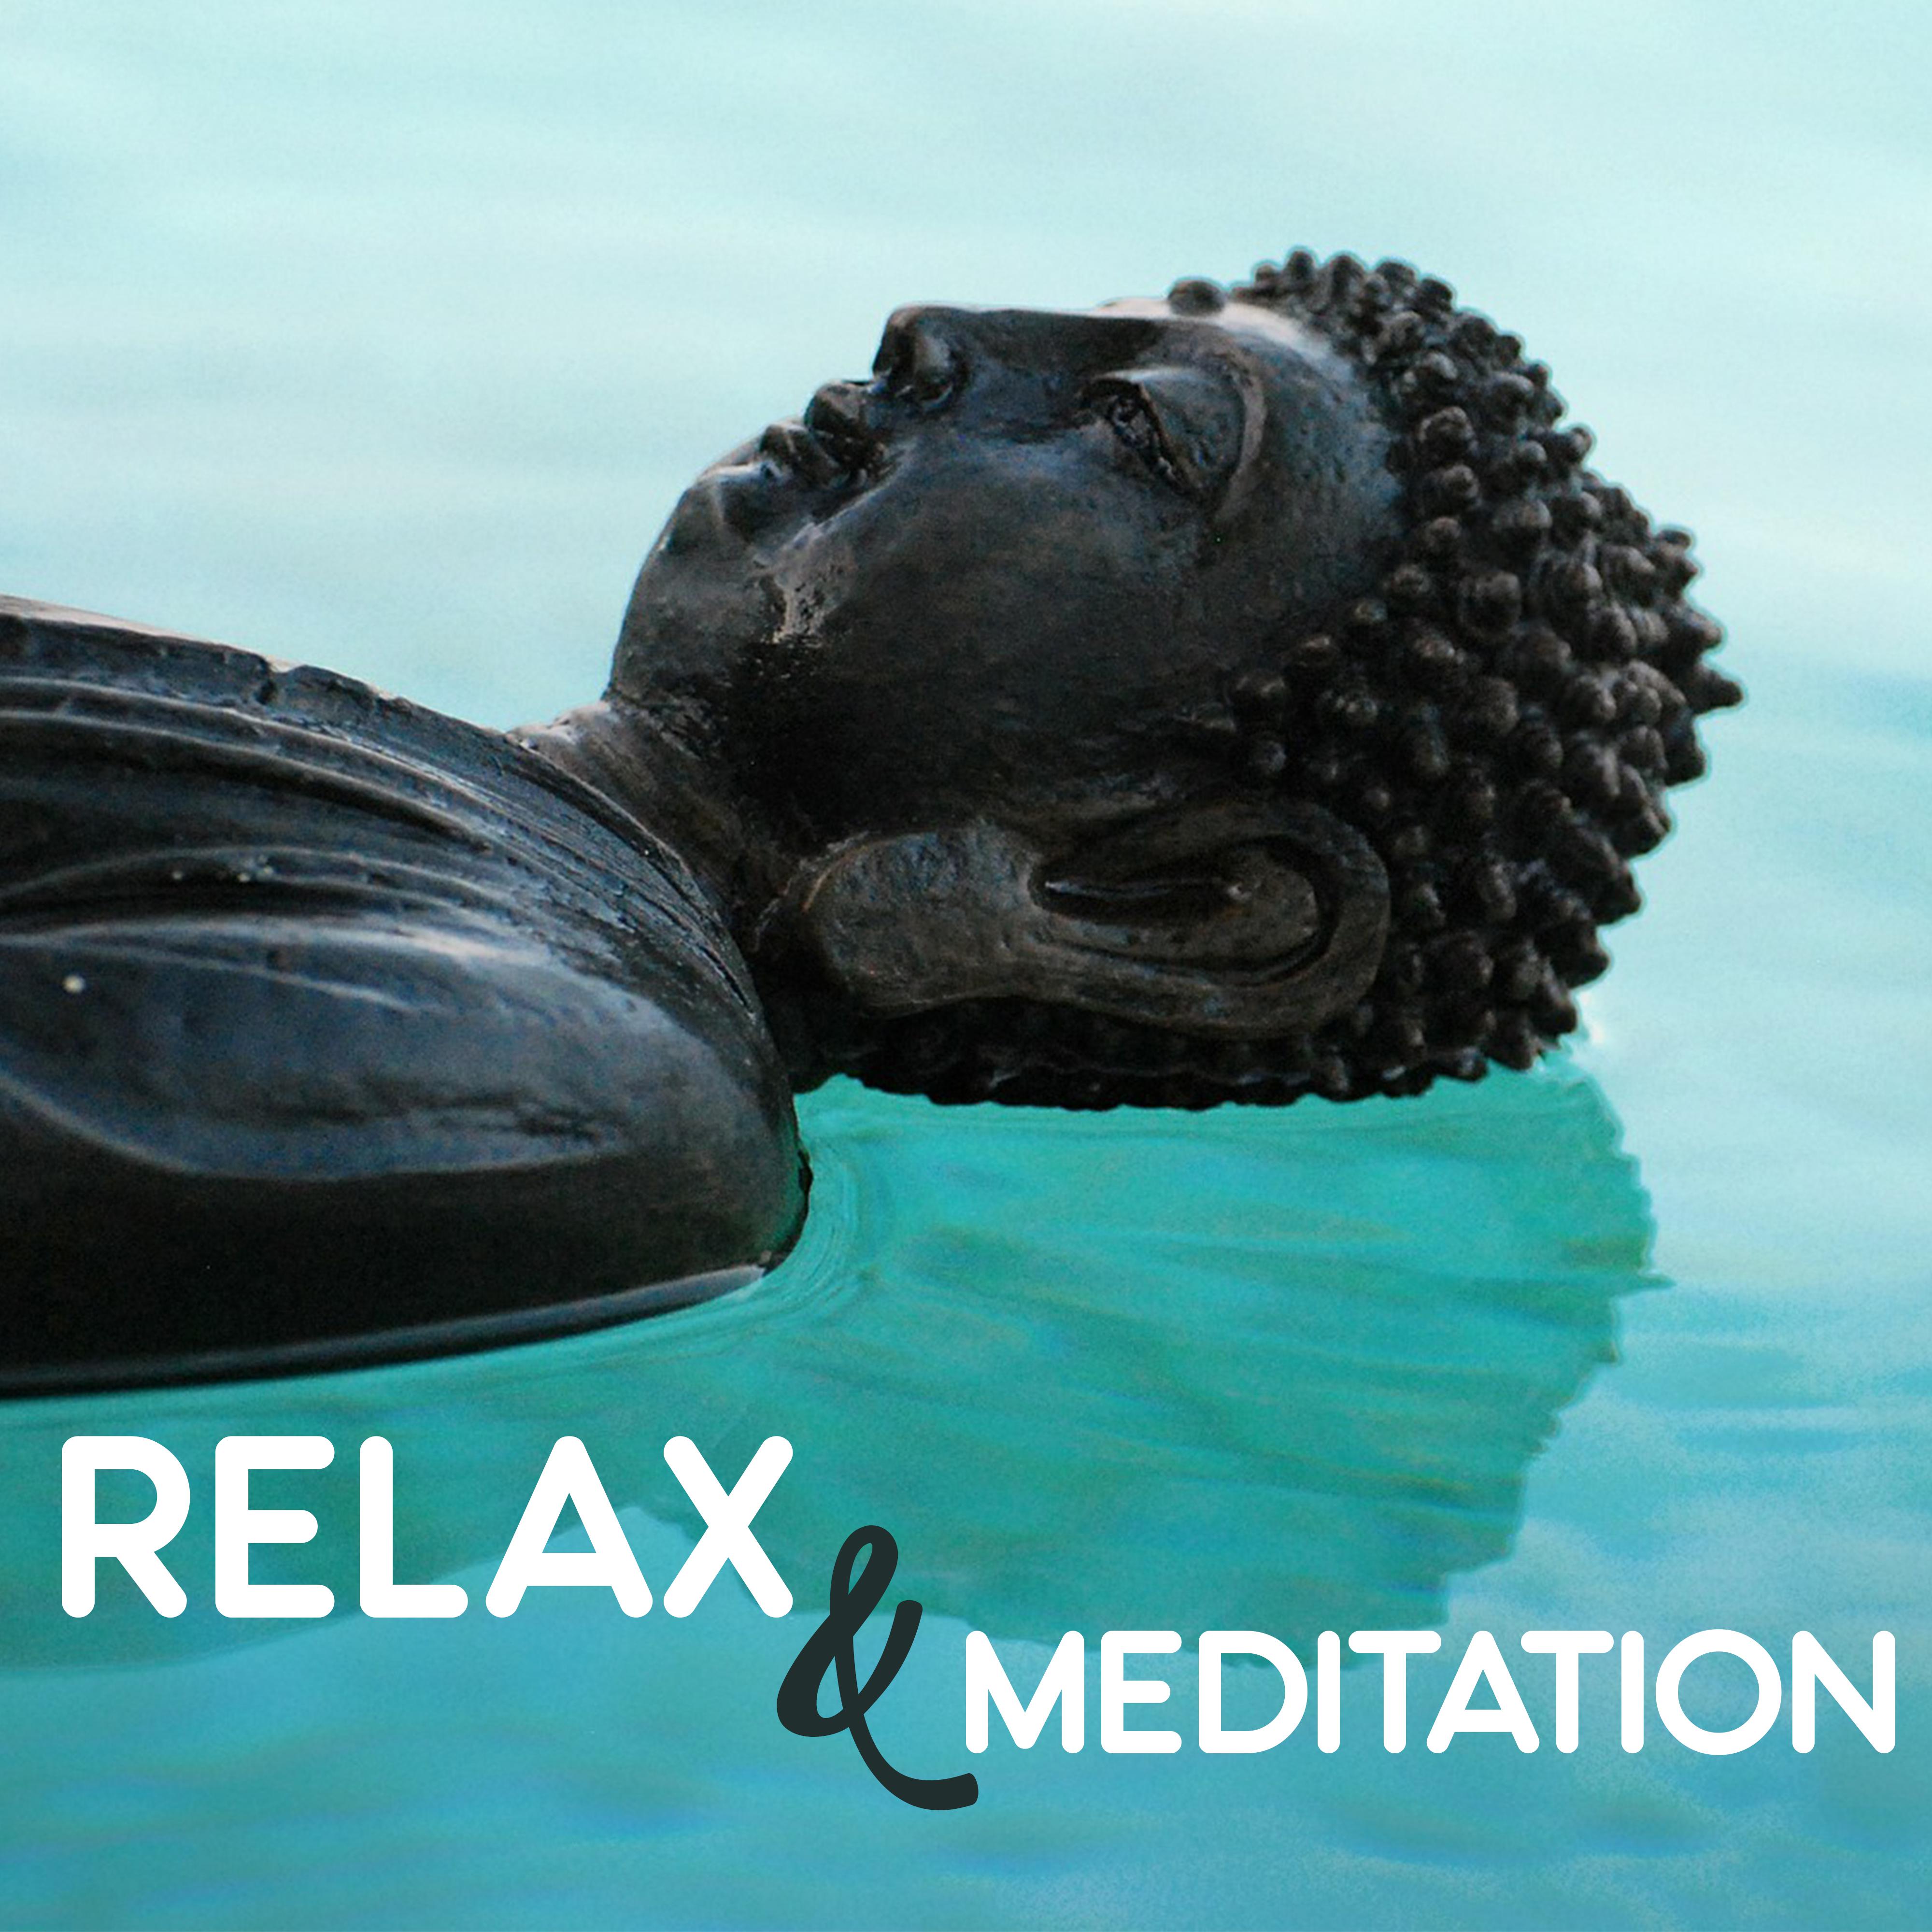 Relax & Meditation – Music for Relaxation, Peaceful Mind, Train Your Brain, Deep Sleep, Oriental Music, Healing Sounds